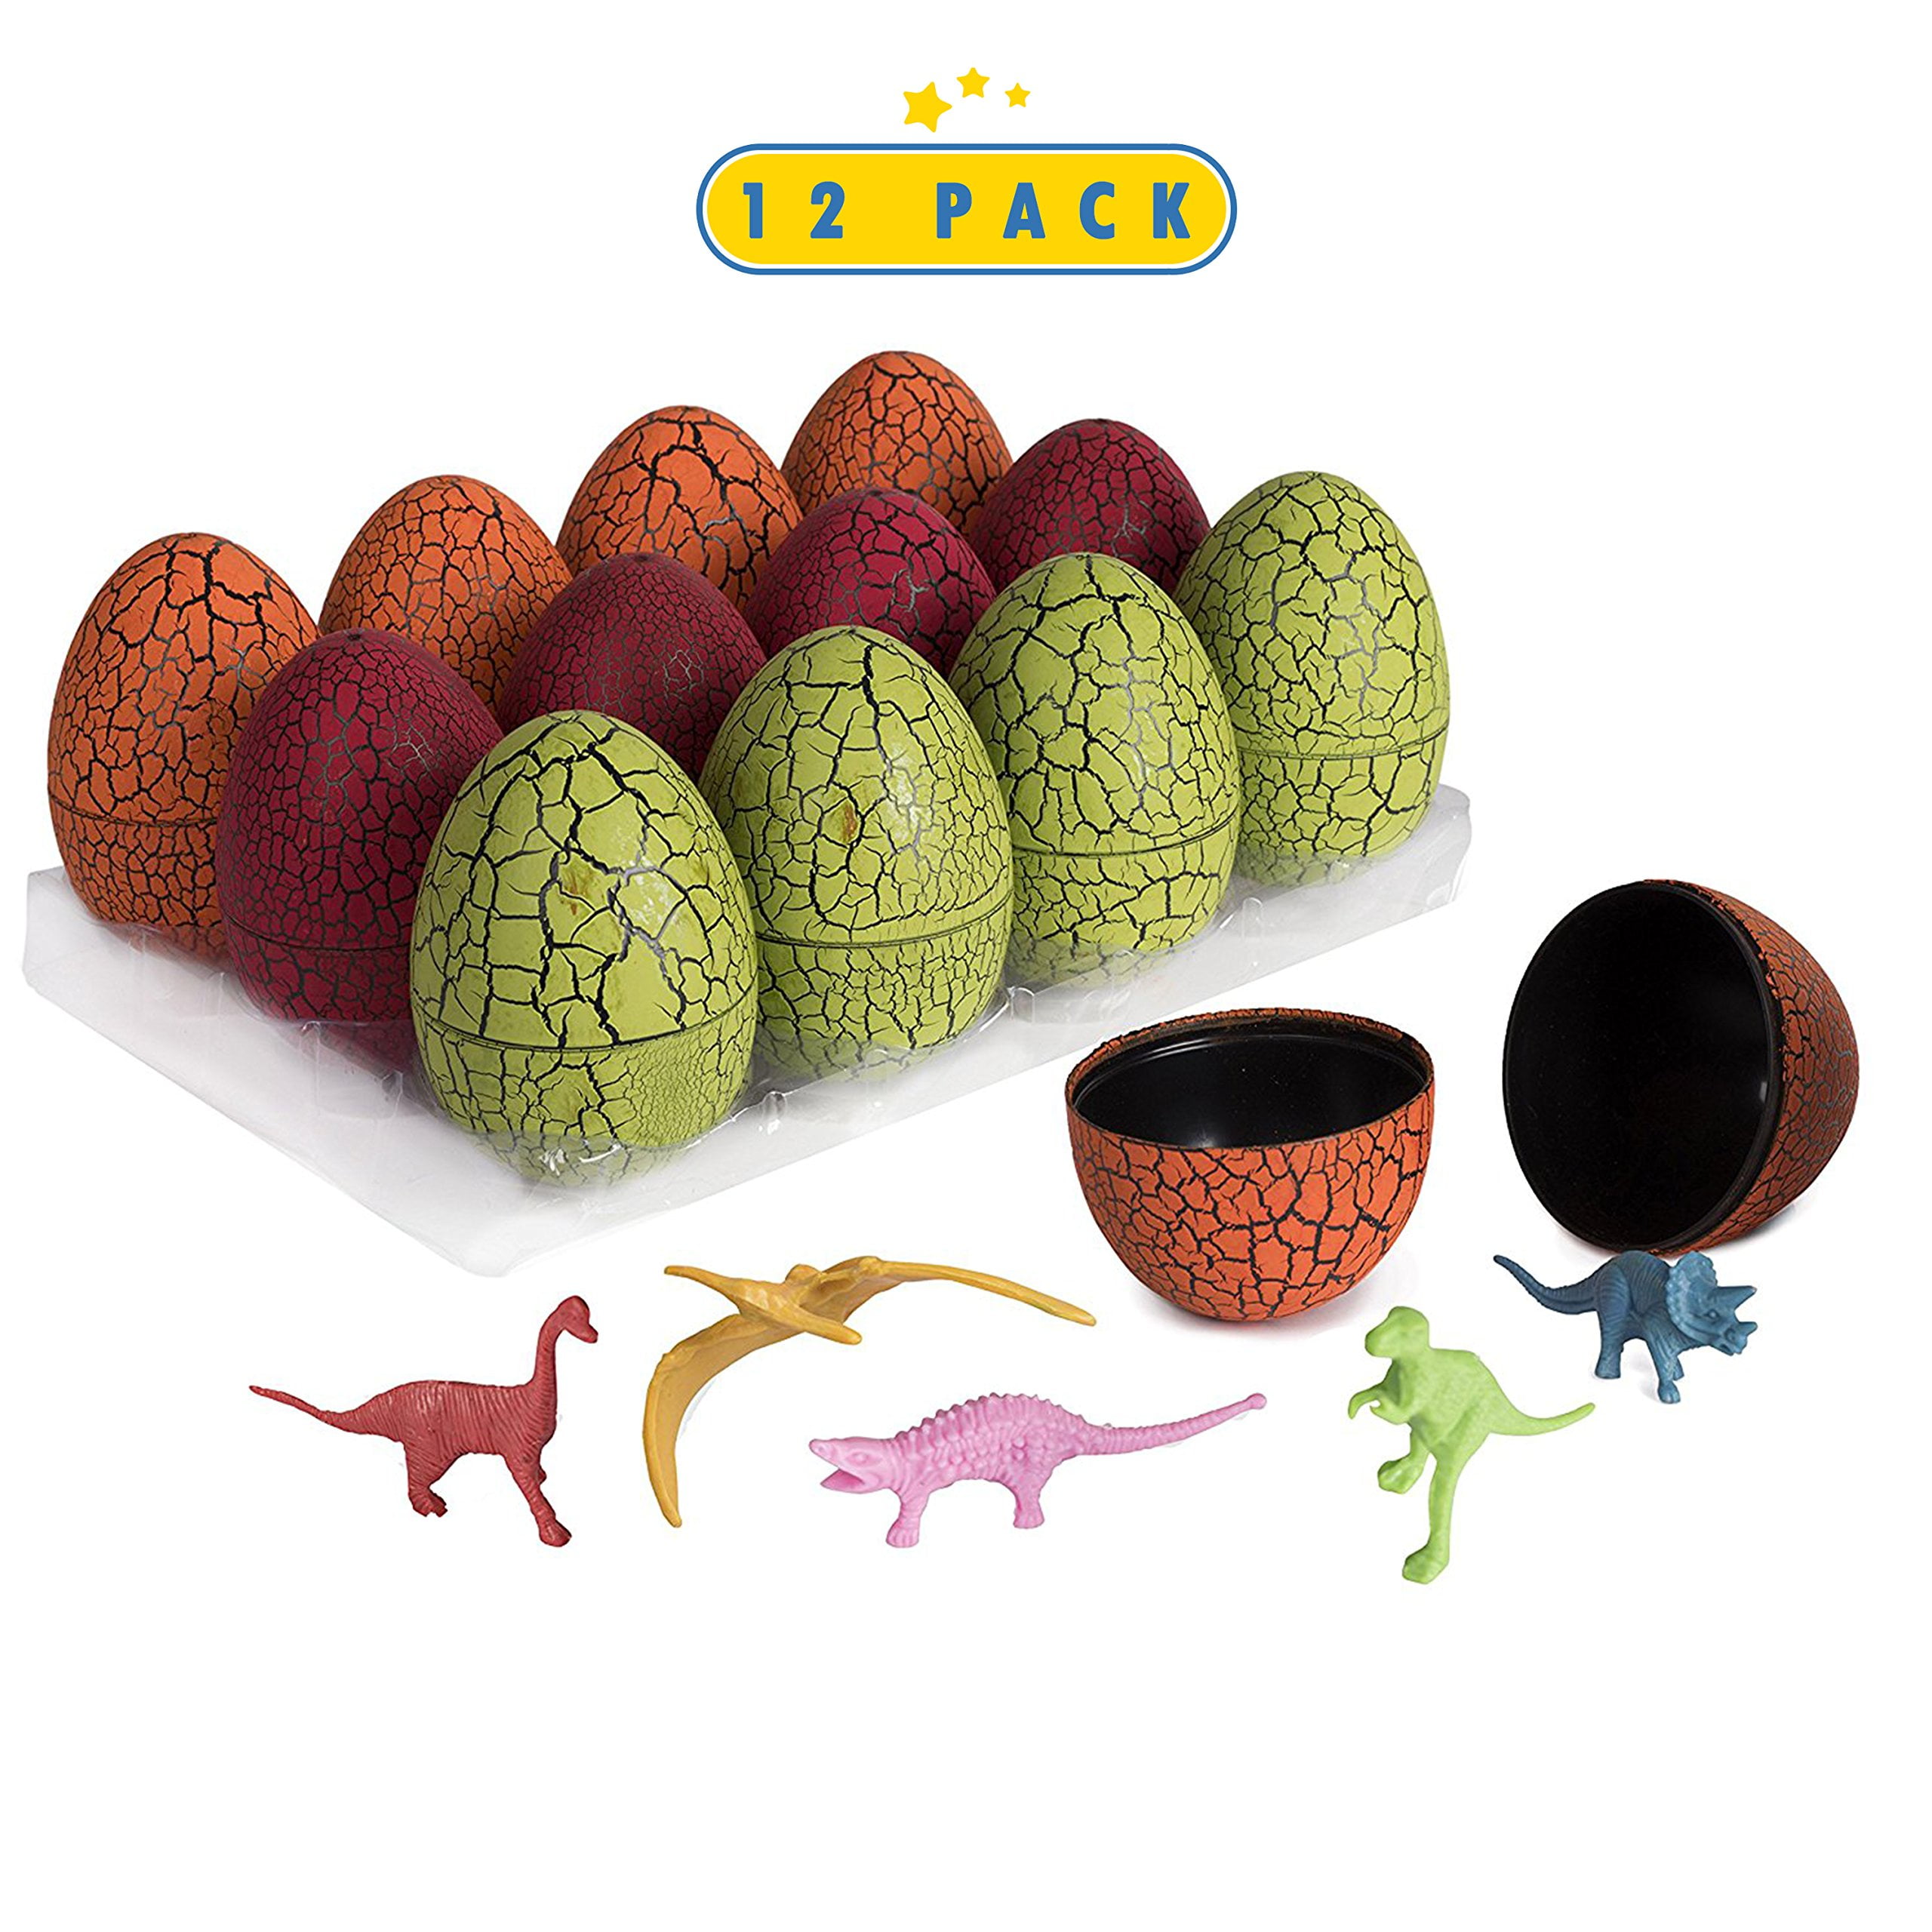 iGeeKid 40PCs Dinosaur Easter Eggs Easter Party Favors Hatching Growing Dino Eggs filled Variety Dinosaur Figures Toy Gift Box for Kids Boys Easter Basket Stuffers Classroom Prizes Easter Egg Hunt 